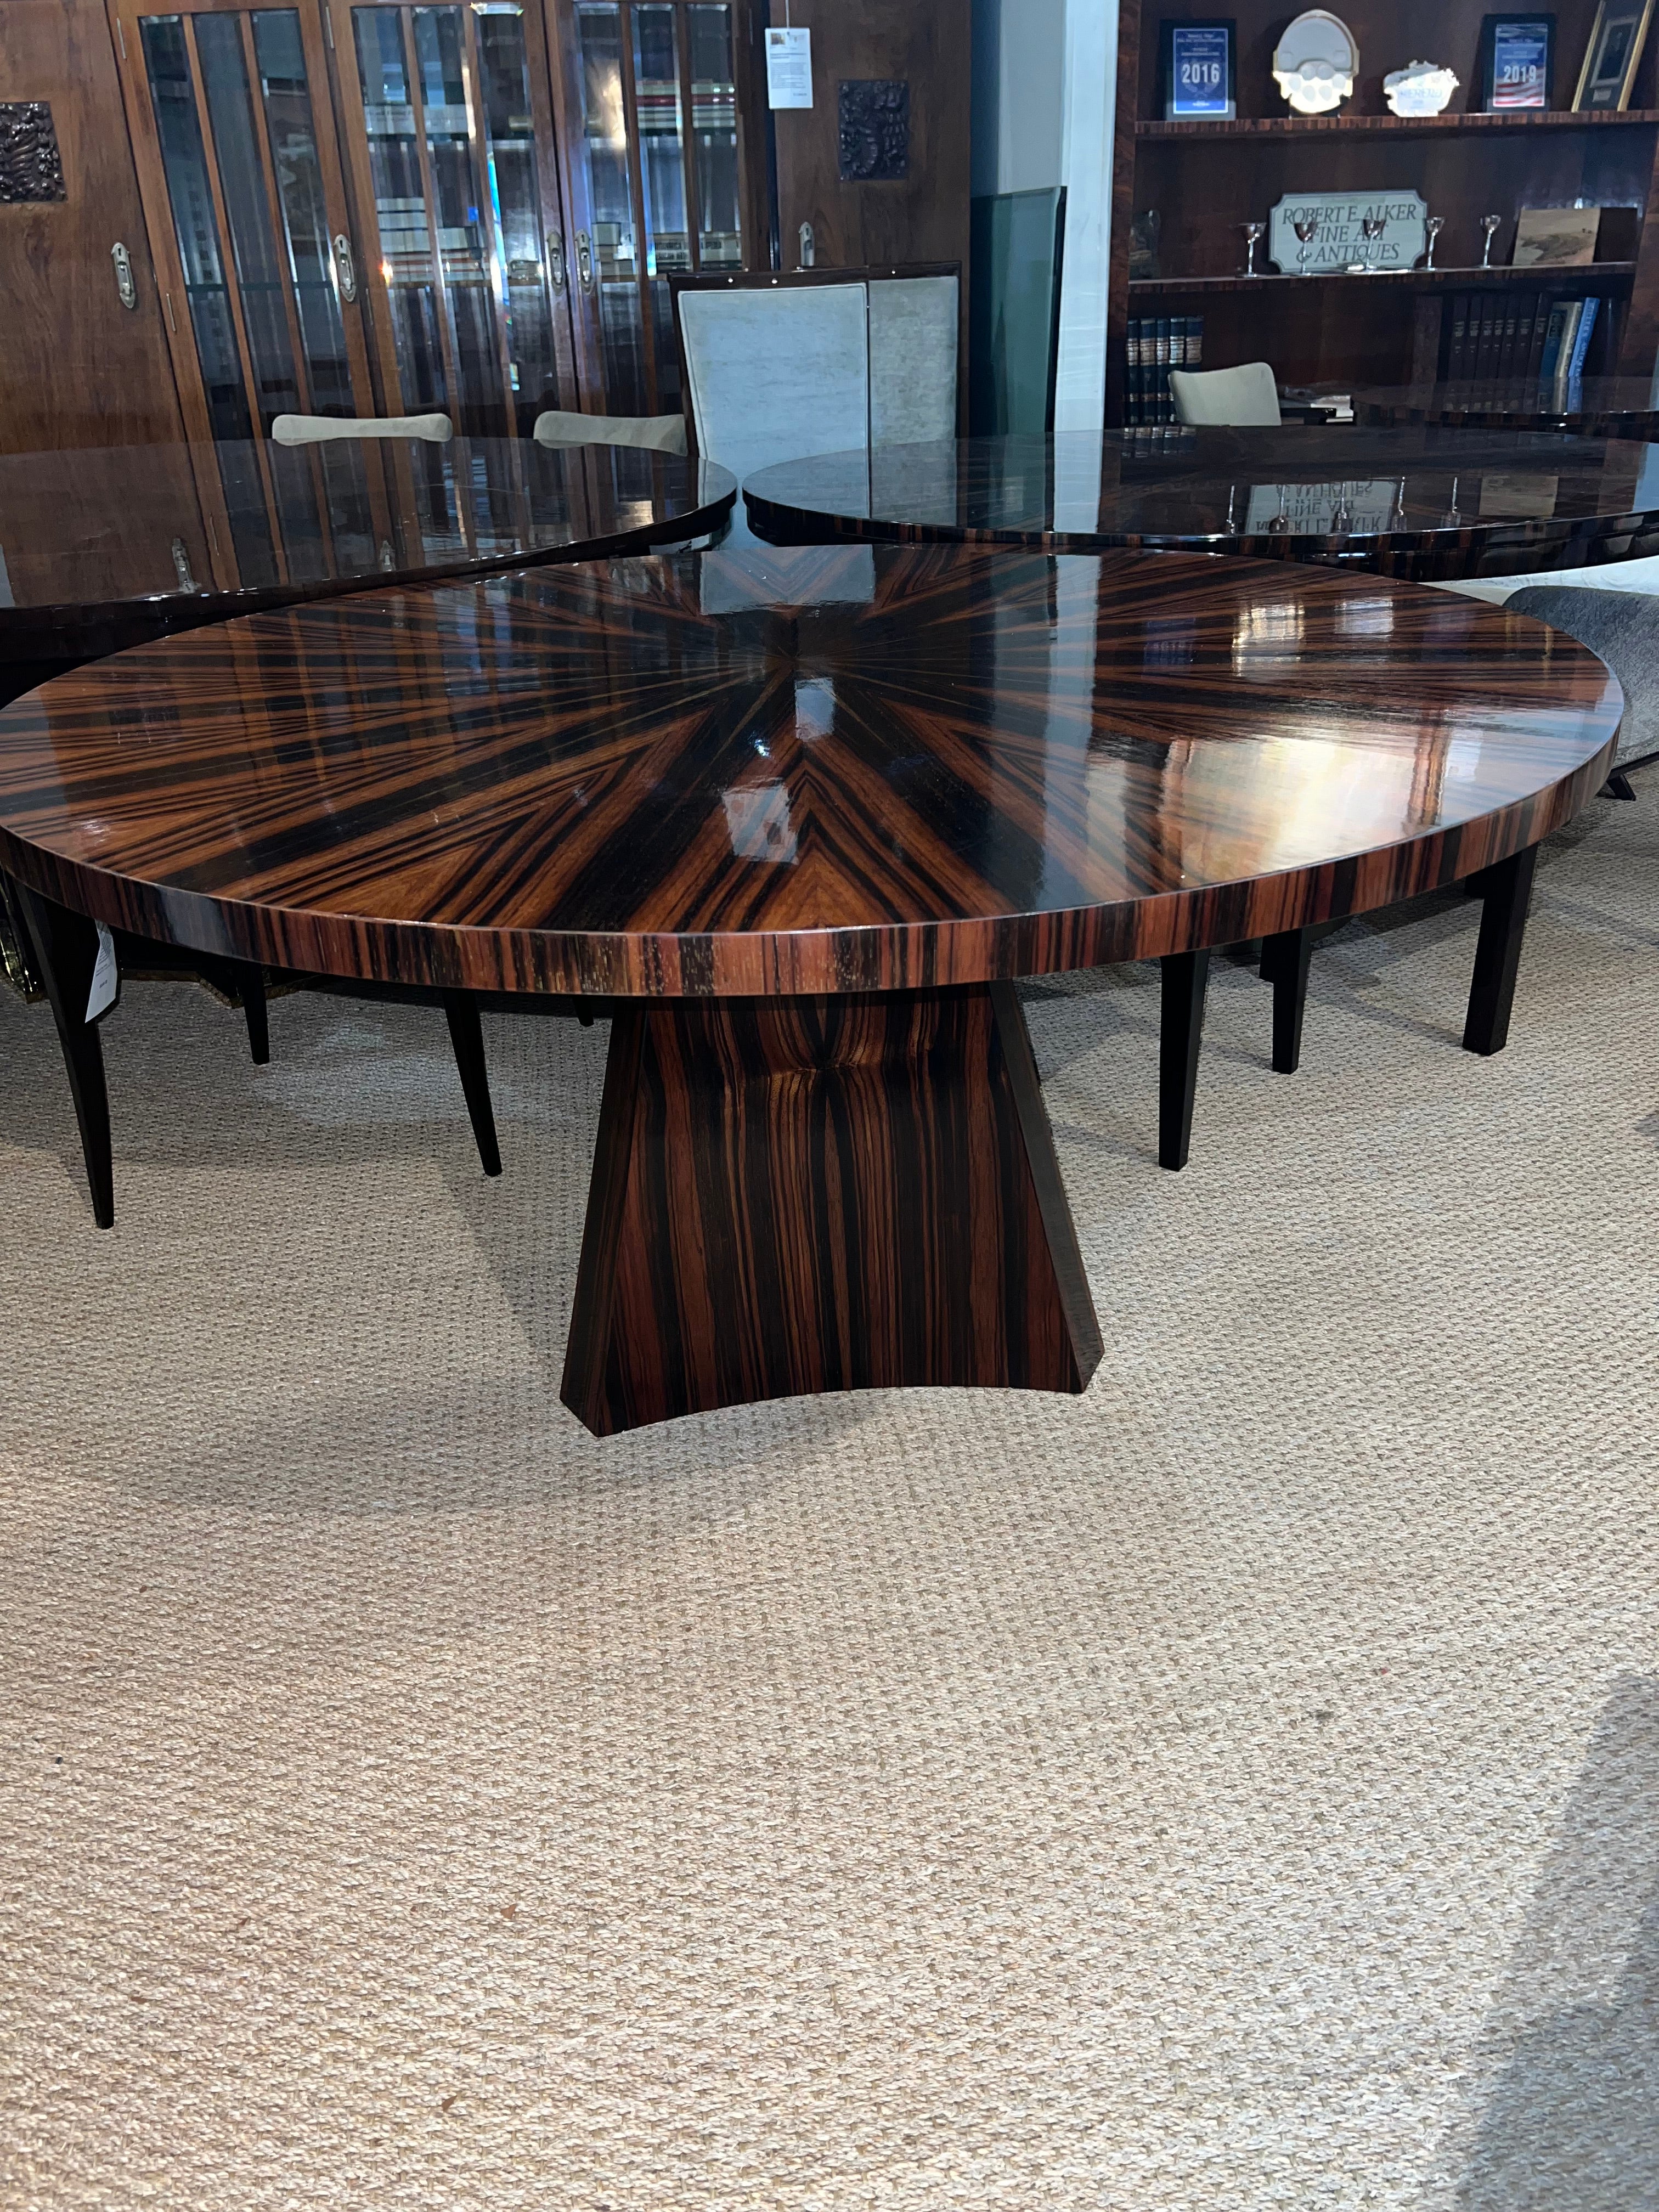 Beautiful Art Deco Dining Room circle table done with inlaid Macassar wood. Wide table top displays gorgeous wood grain. Top is supported by the prominent stable base.

Condition is perfect. Restored.
France, c. 1930s
57